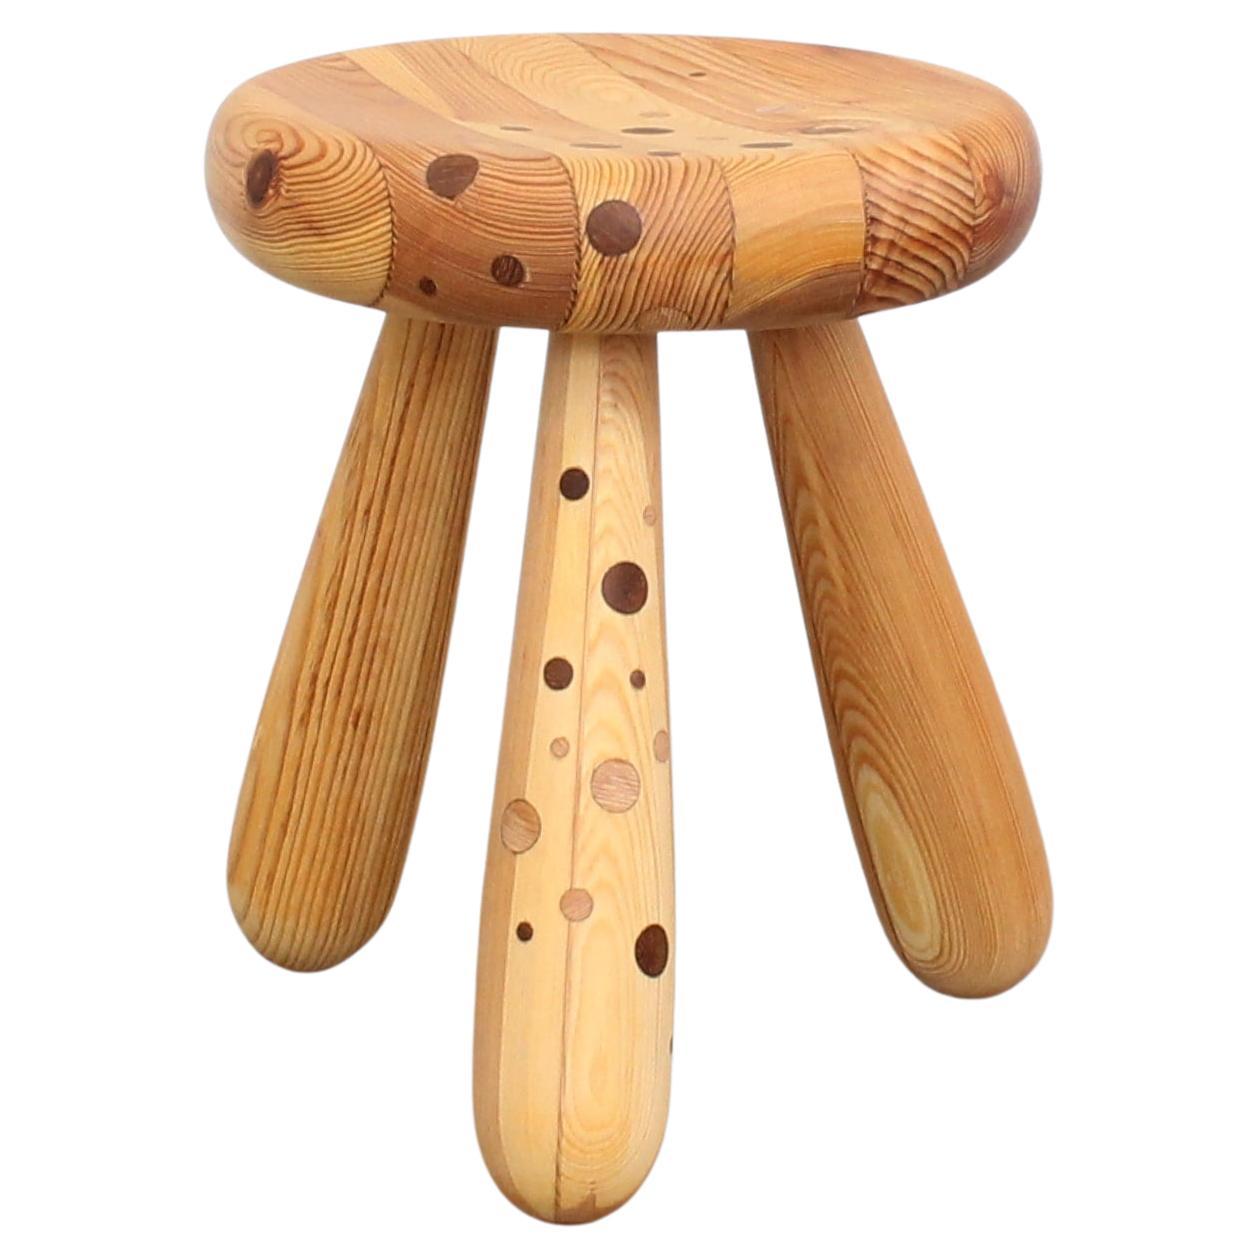 Swedish milking stool in pine and teak by Andreas Zätterqvist For Sale